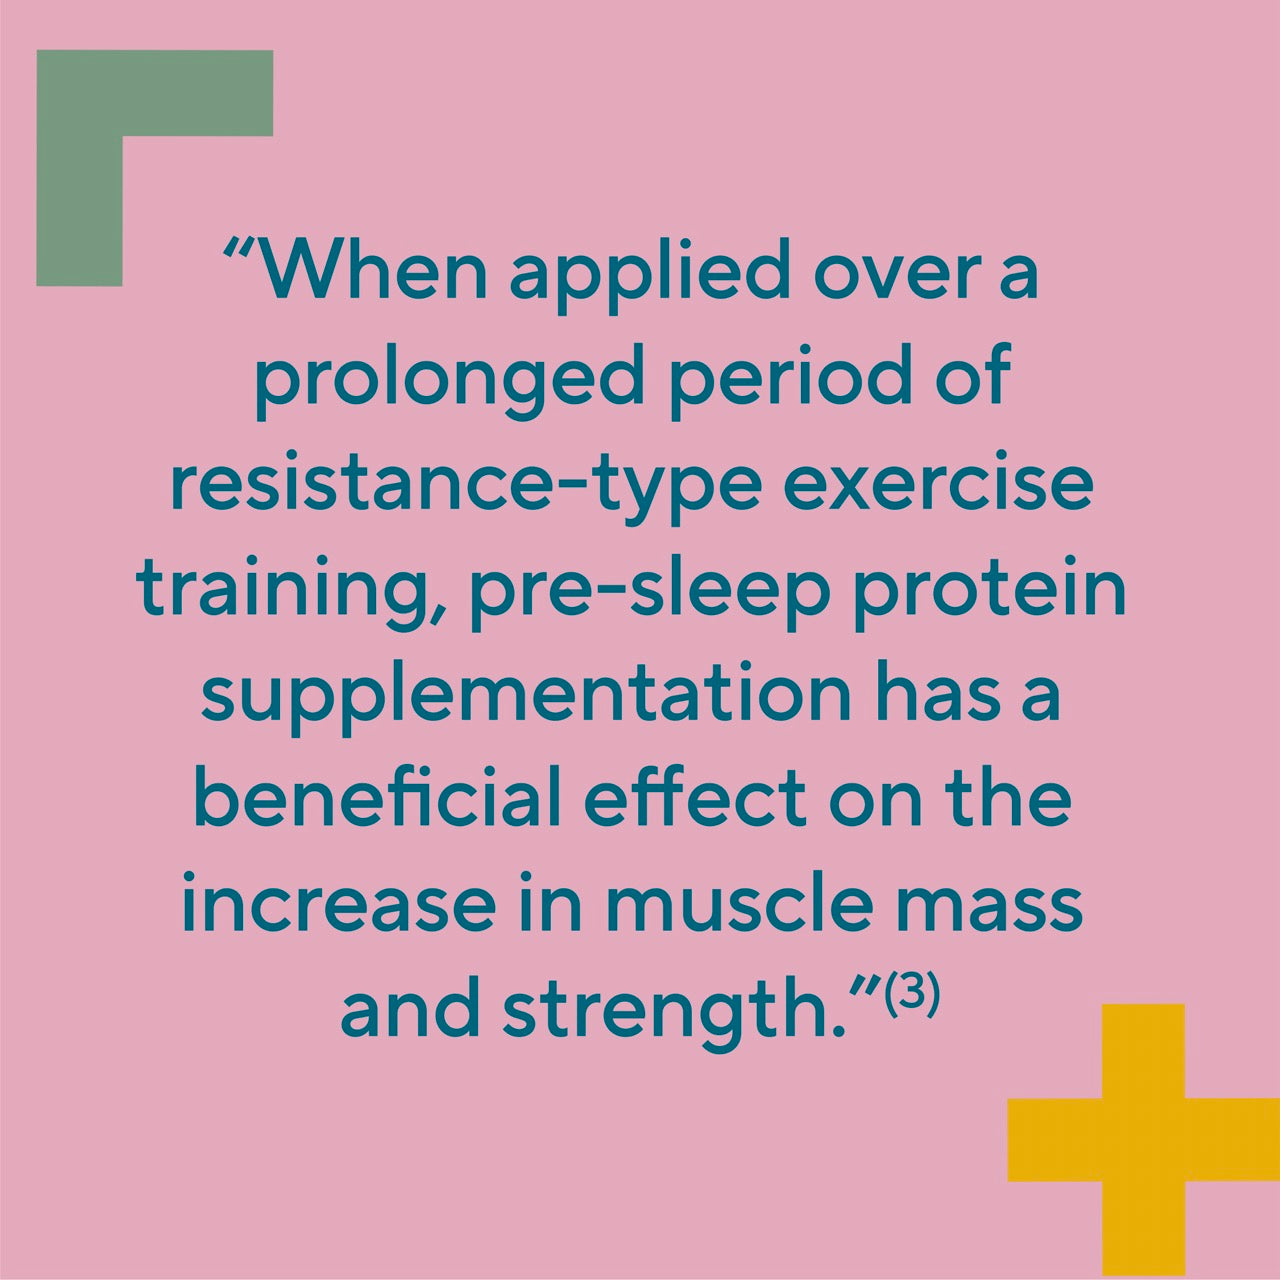 Quote of Benefits of Consuming Protein Before Sleep